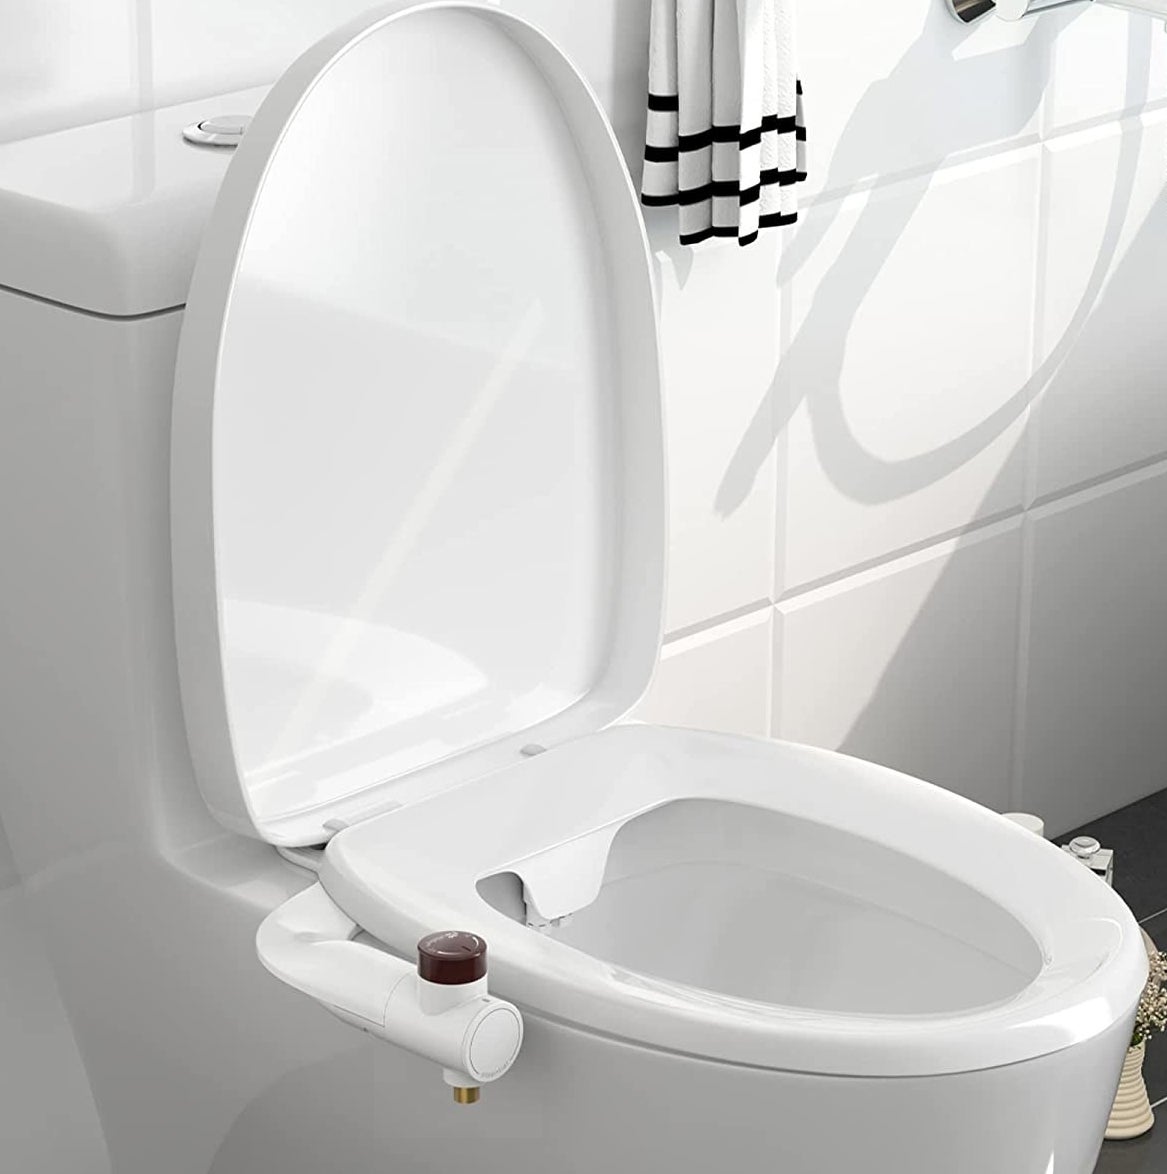 The bidet attachment on a toilet